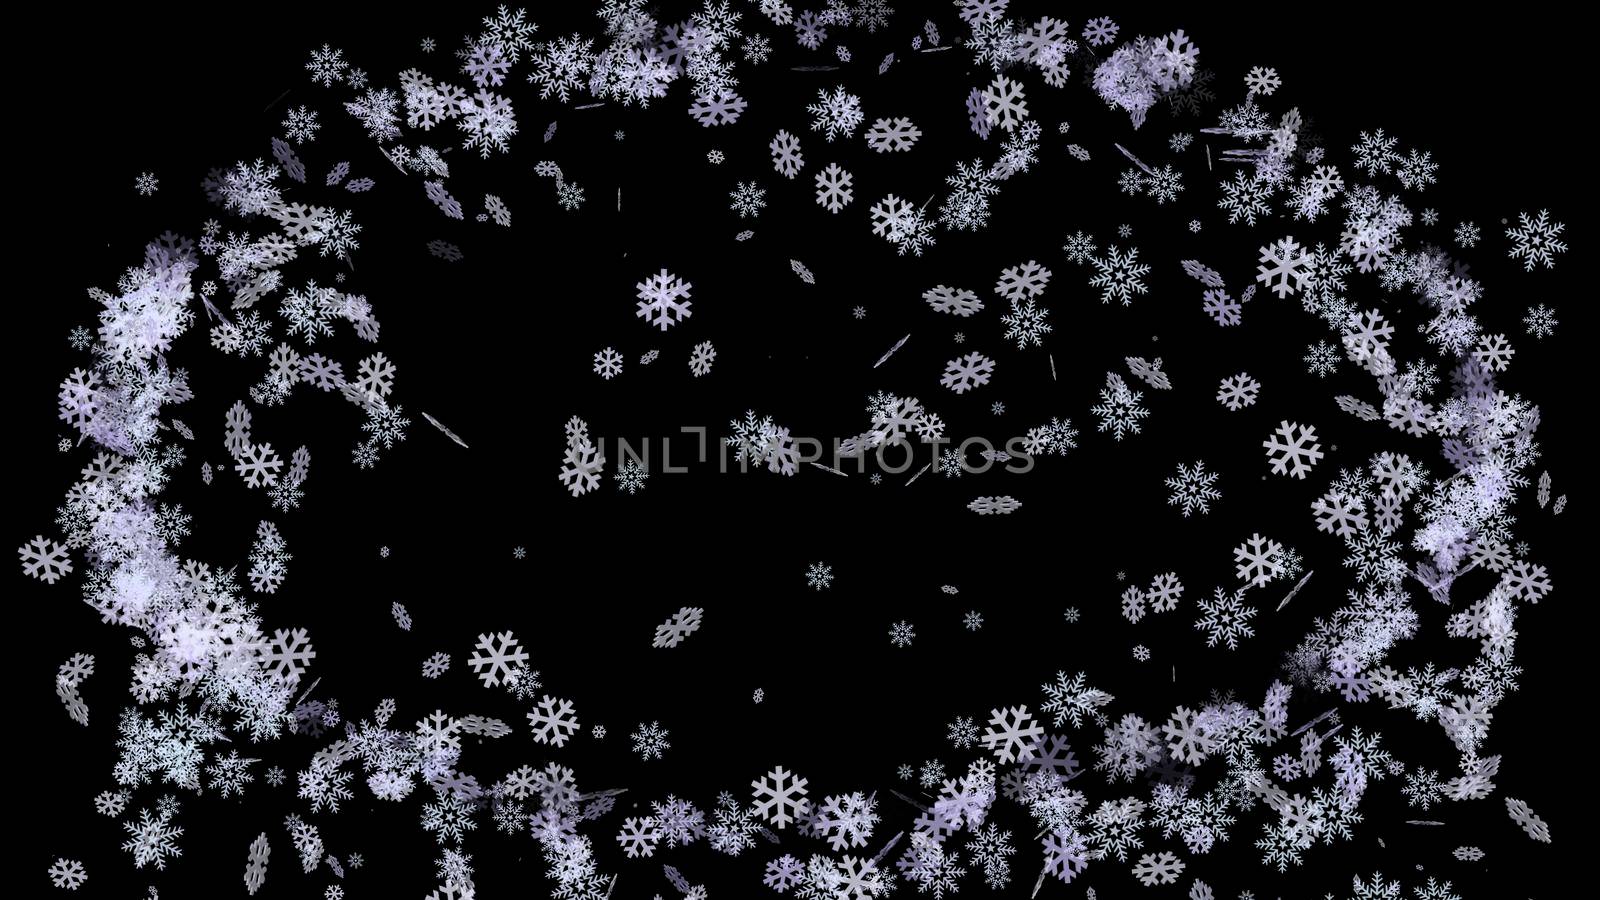 Abstract black background with a frame of white snowflakes by Vvicca